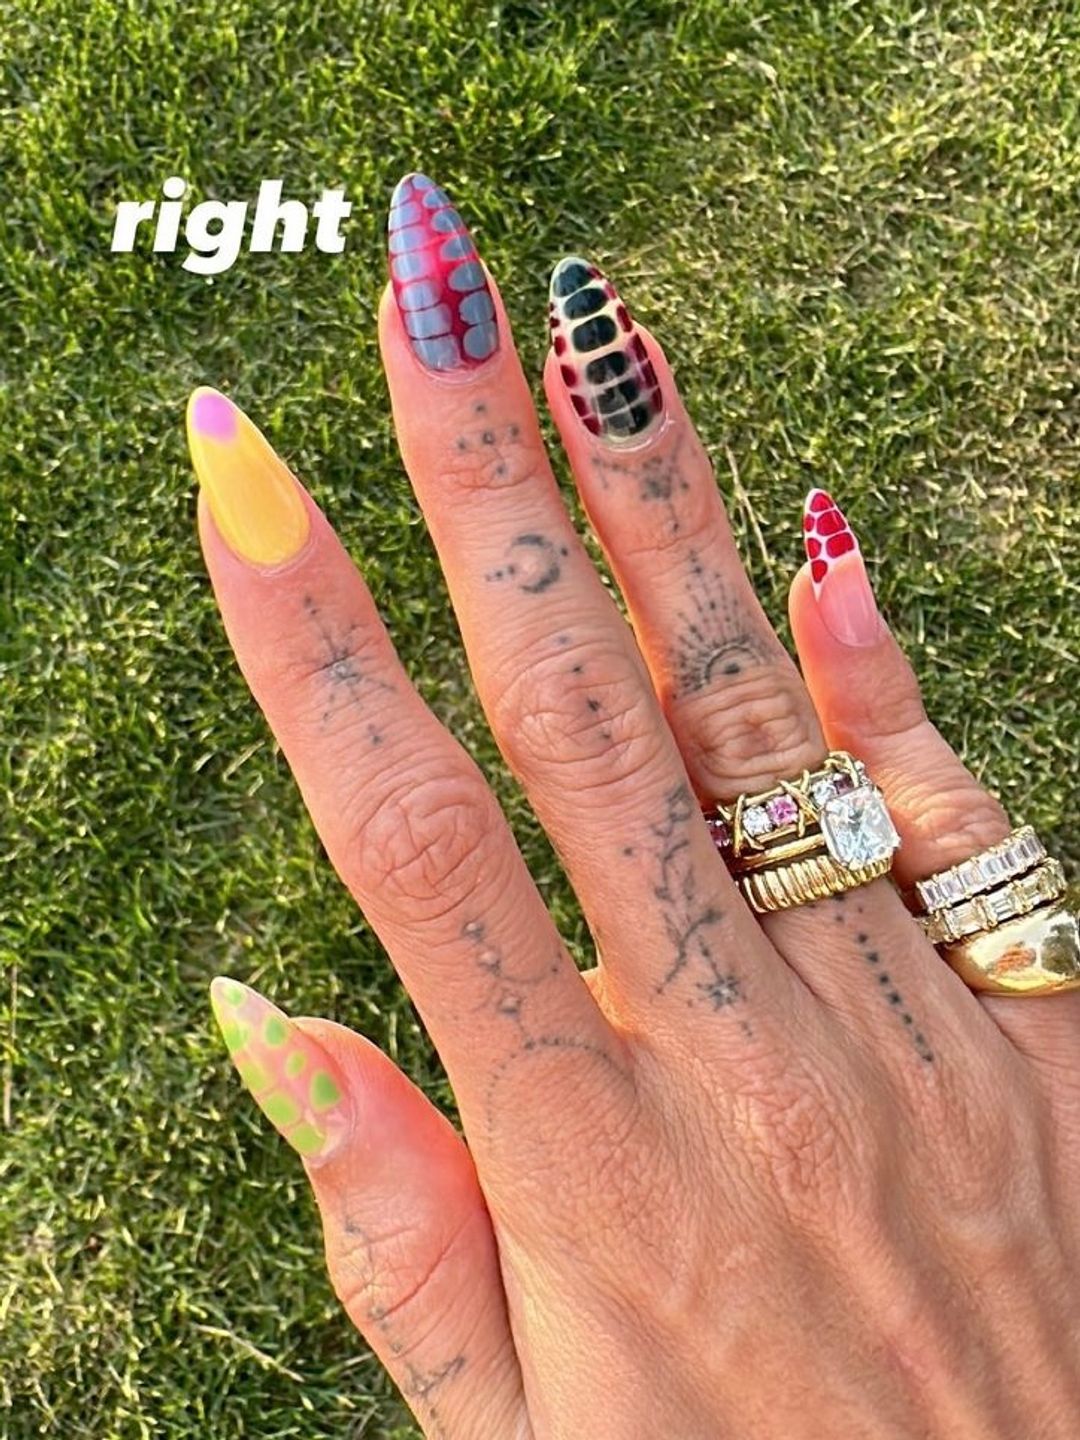 Hailey Bieber's right hand manicure featuring geometric accents 